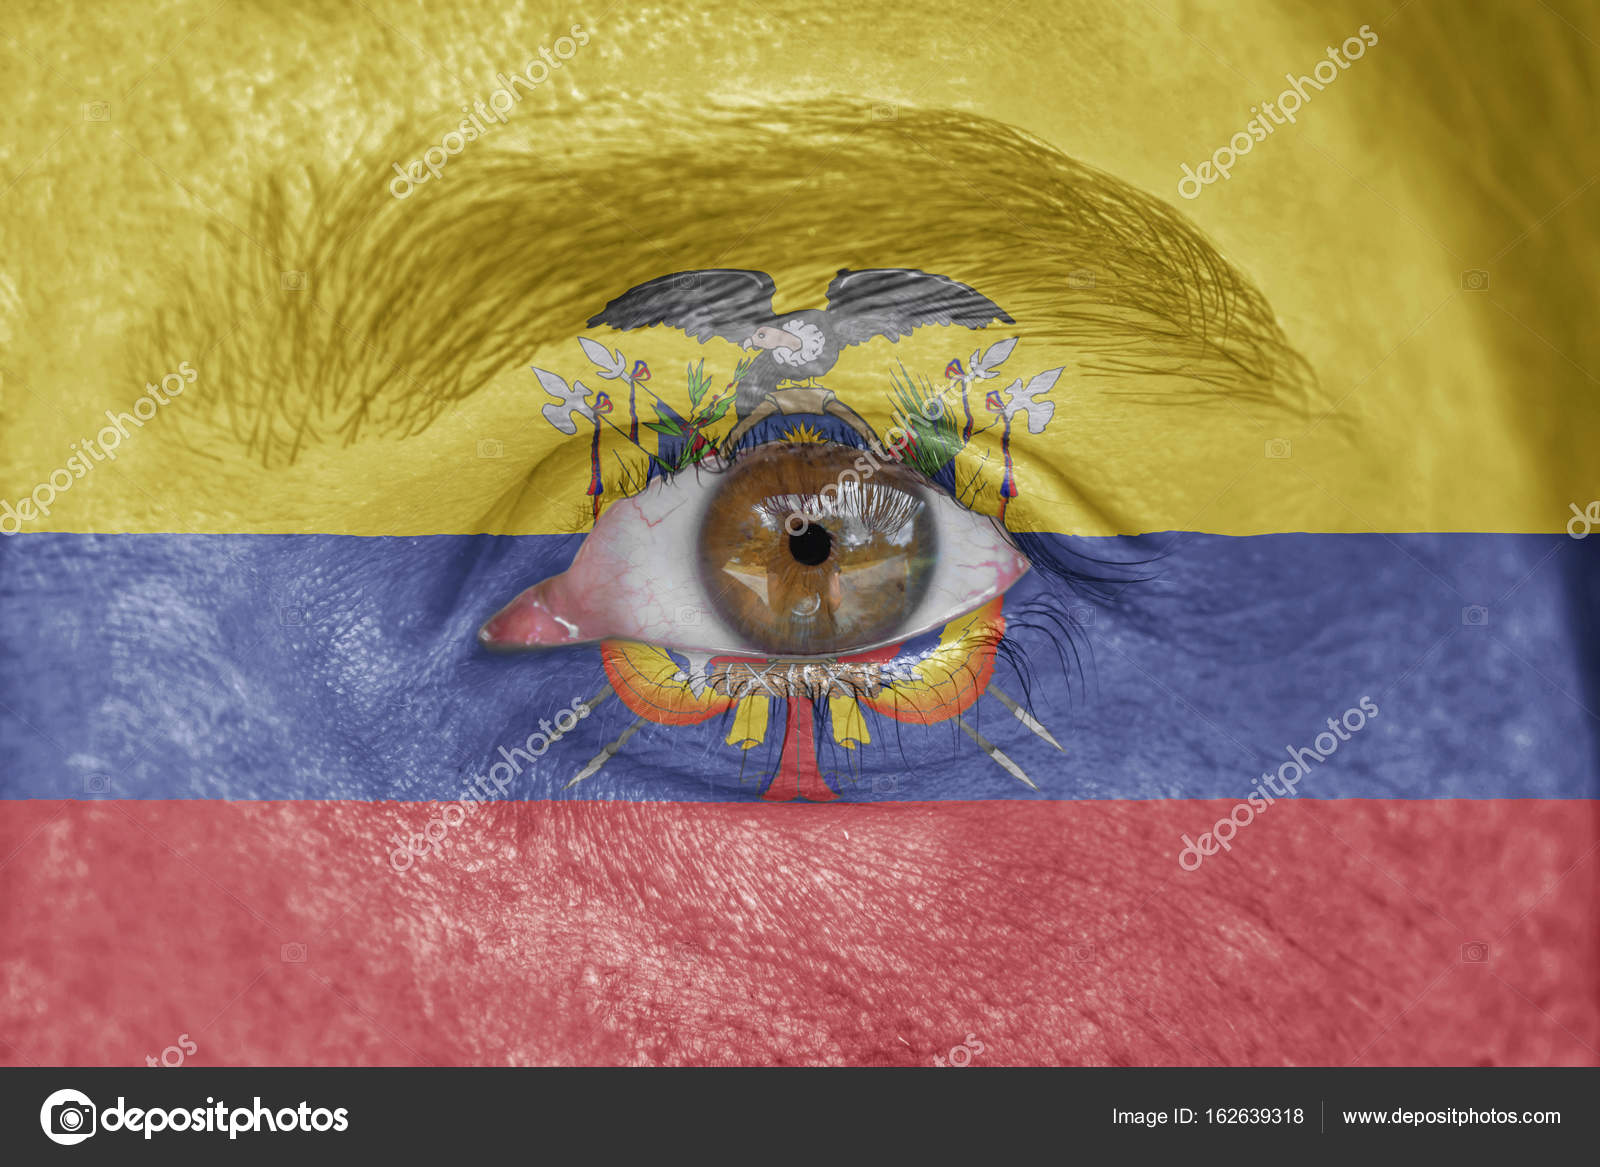 Human Face And Eye Painted With Flag Of Ecuador Stock Photo